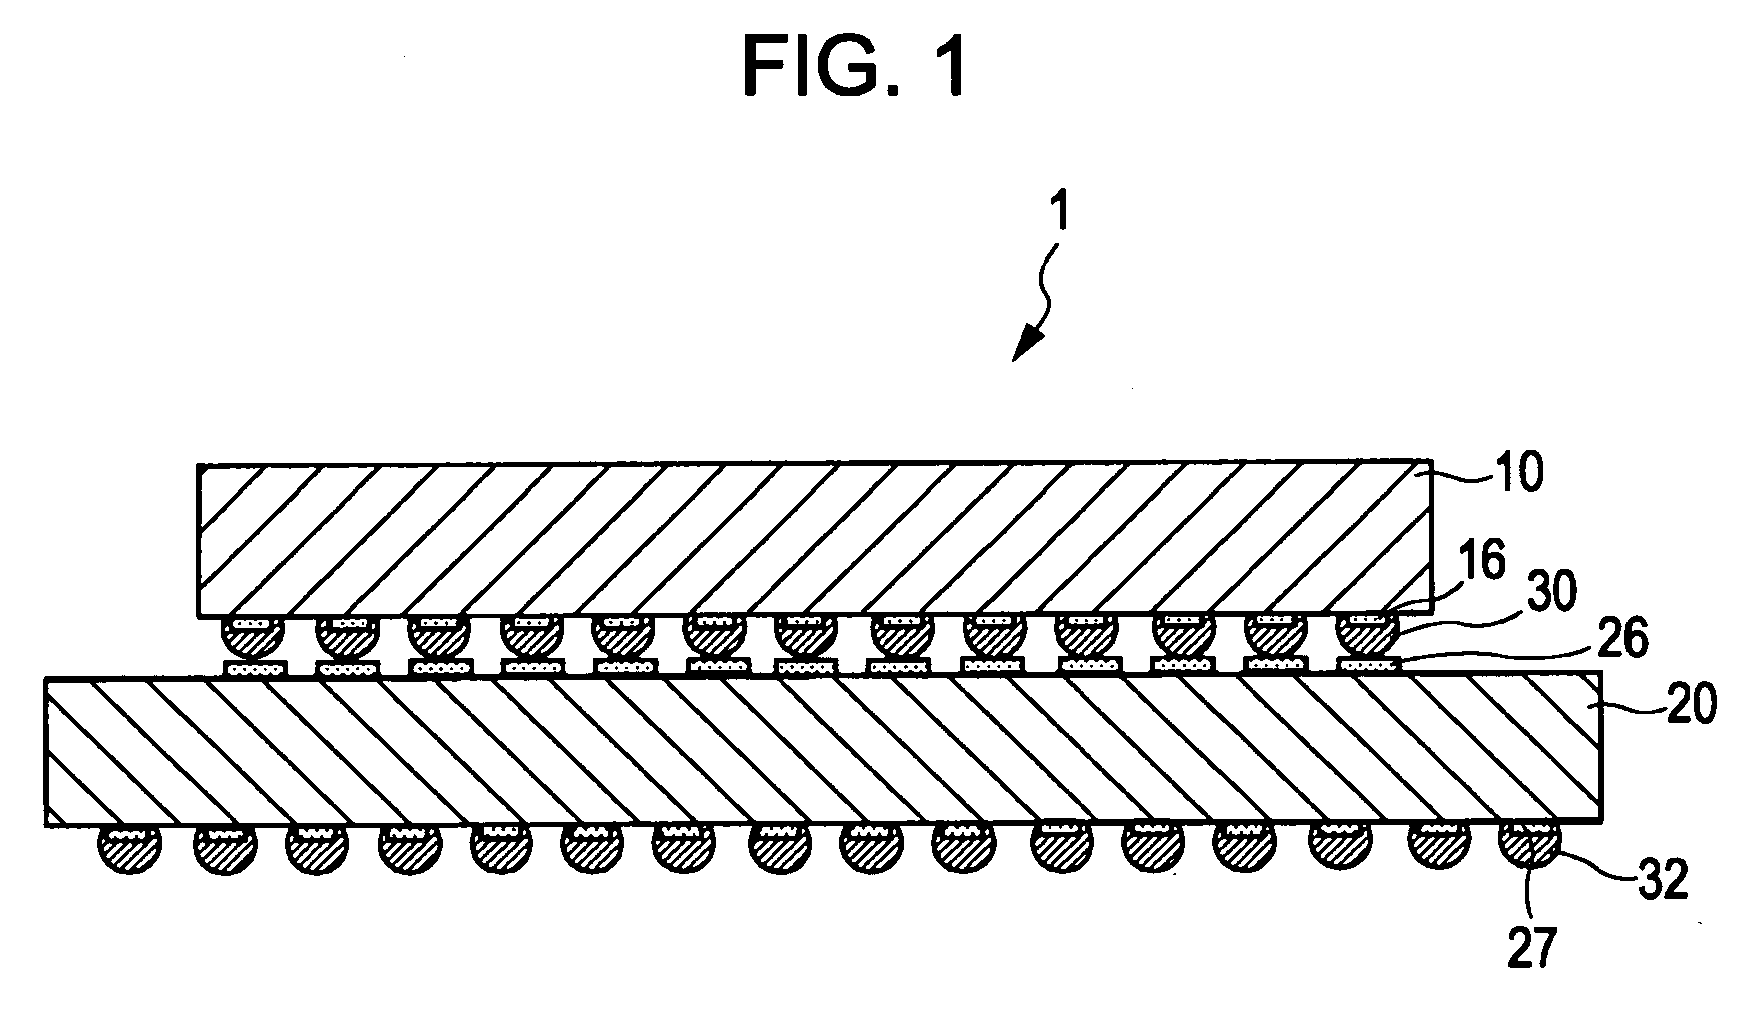 Semiconductor integrated circuit and method for testing connection state between semiconductor integrated circuits